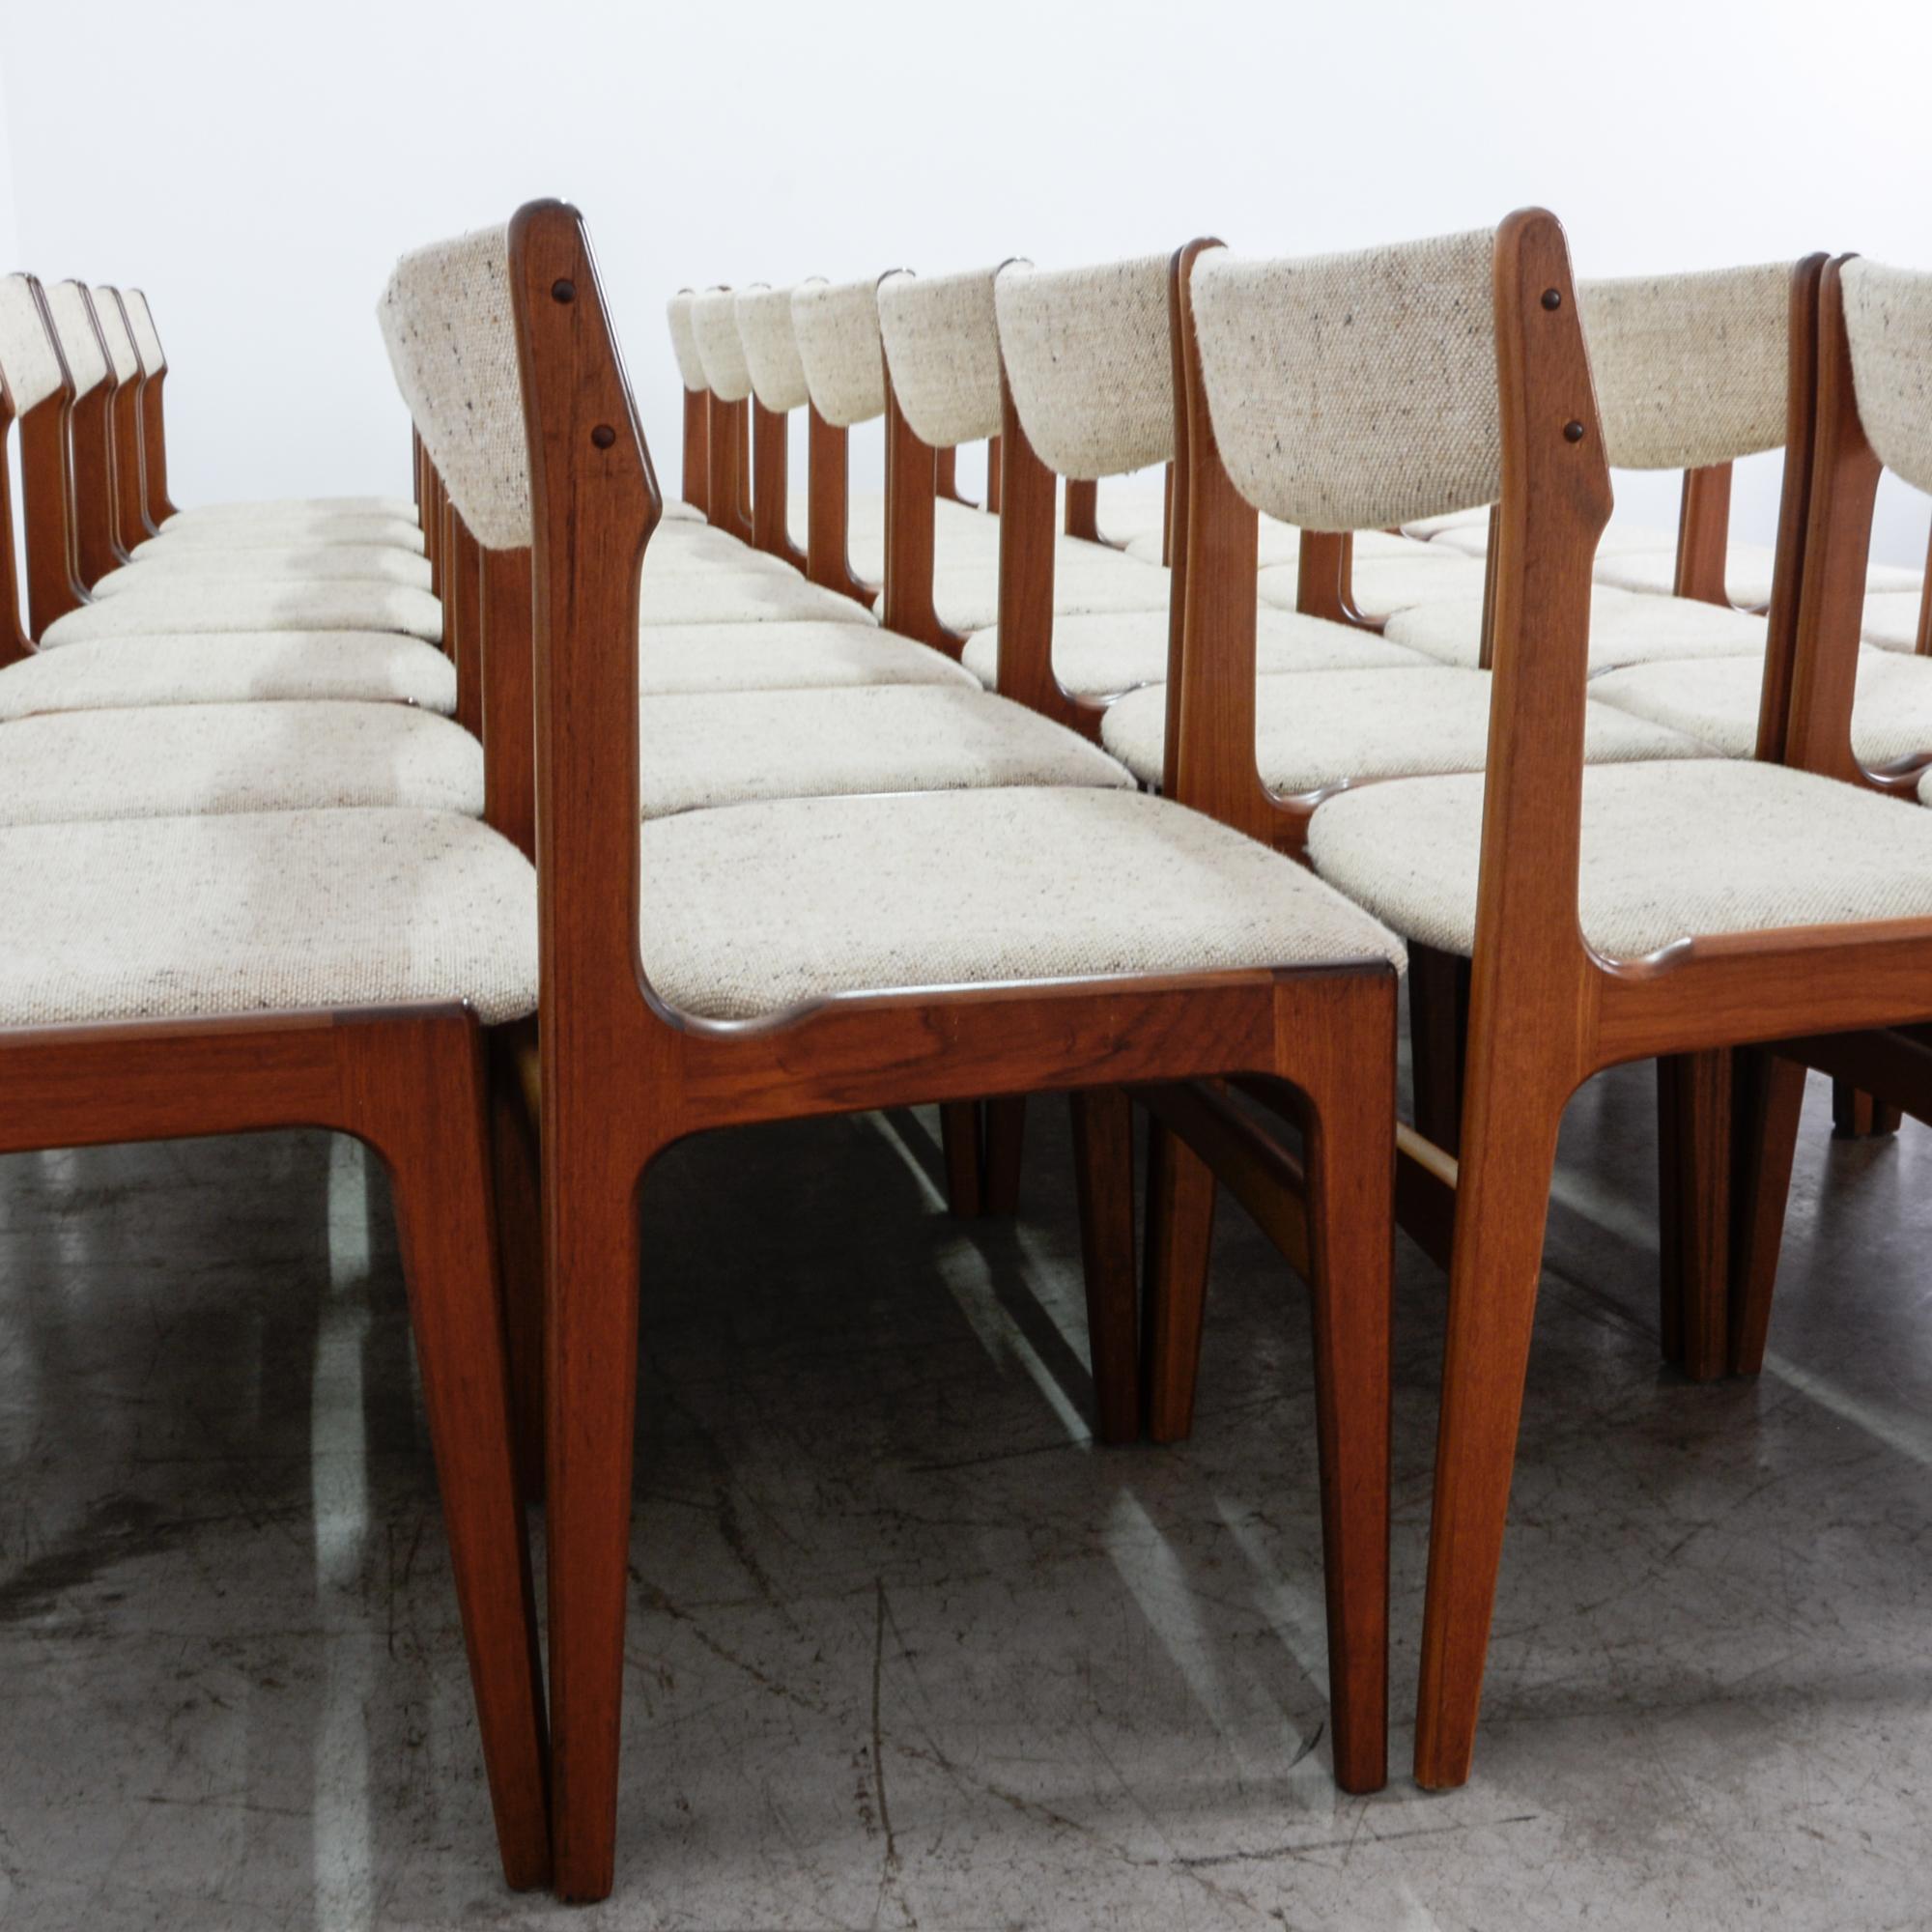 Mid-20th Century Upholstered Teak Dining Chairs, Set of 30